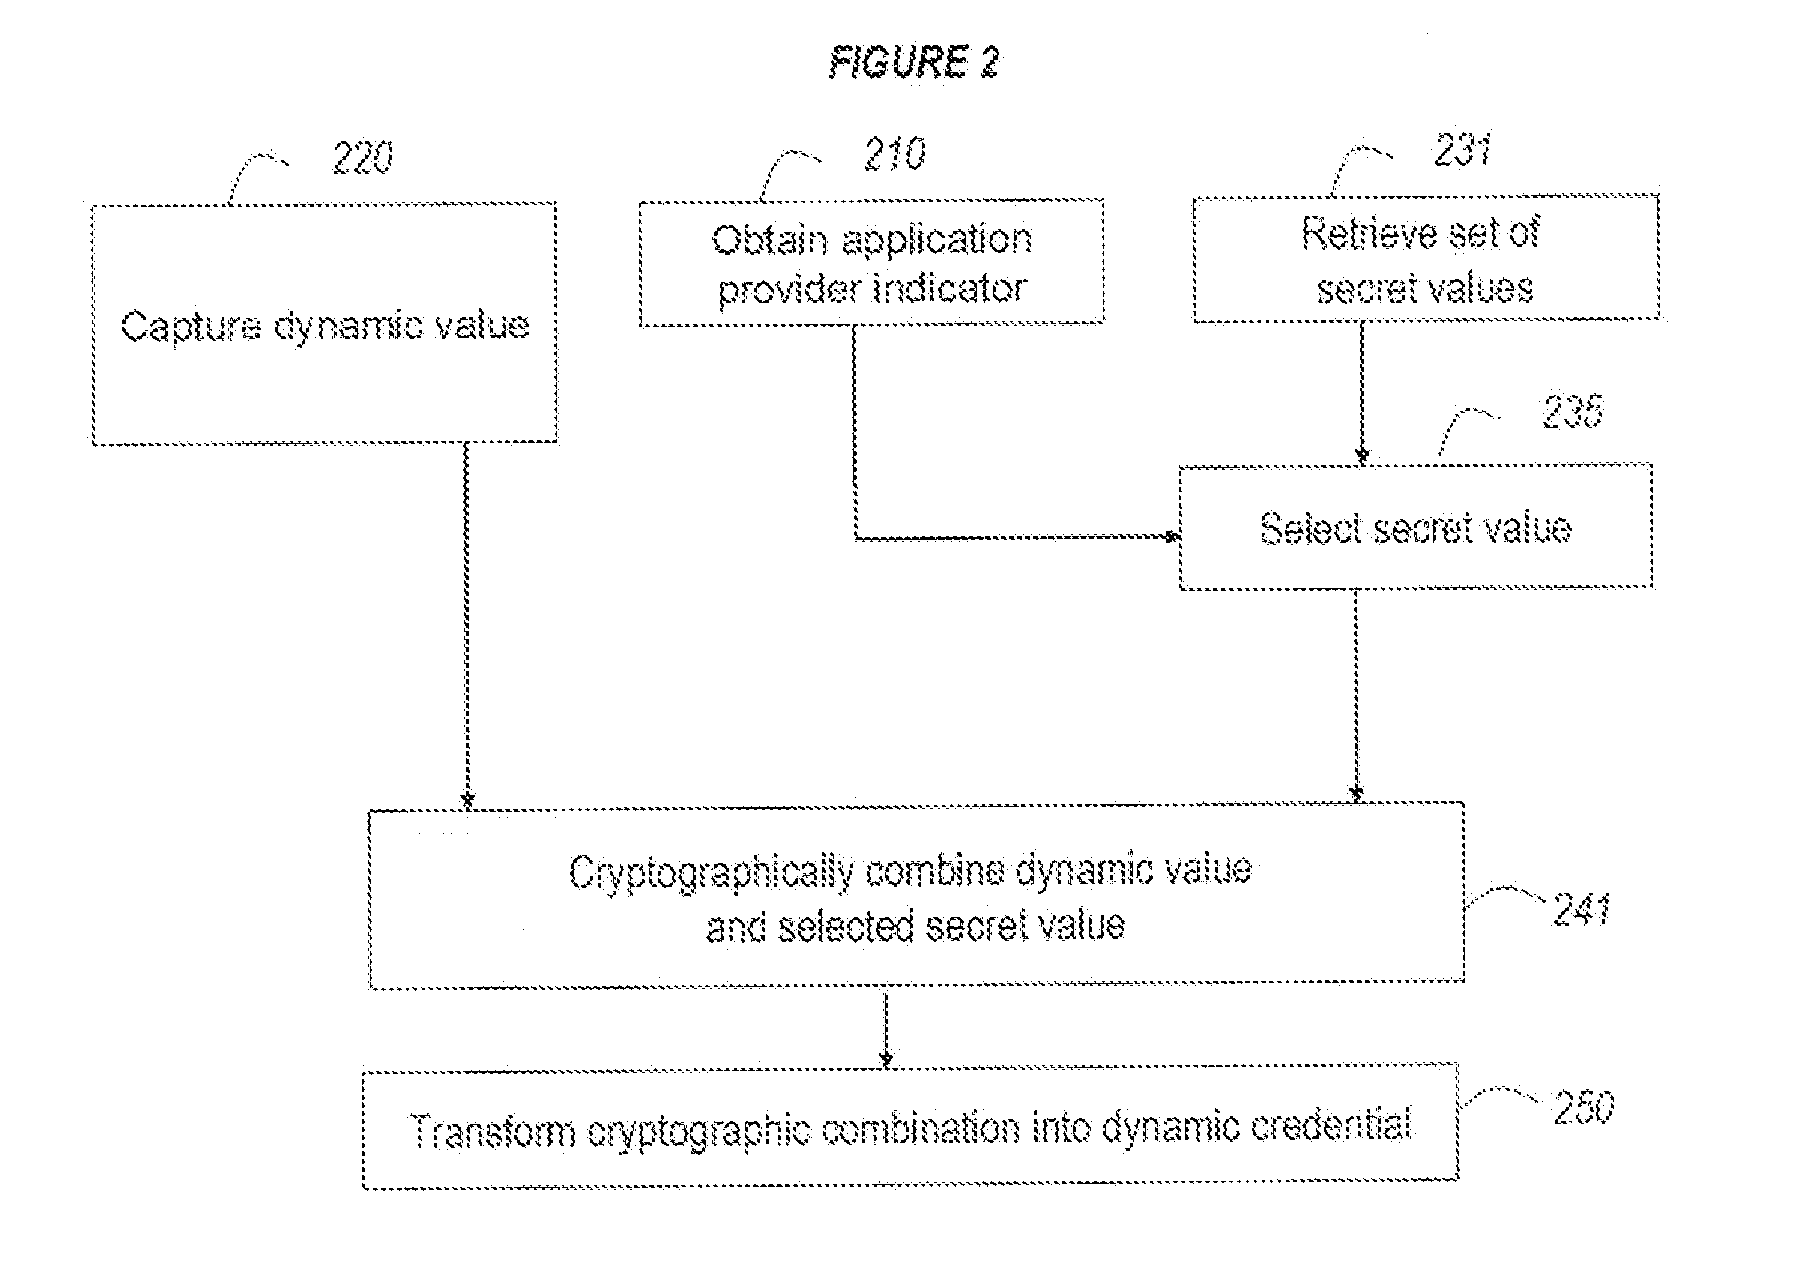 Strong authentication token usable with a plurality of independent application providers